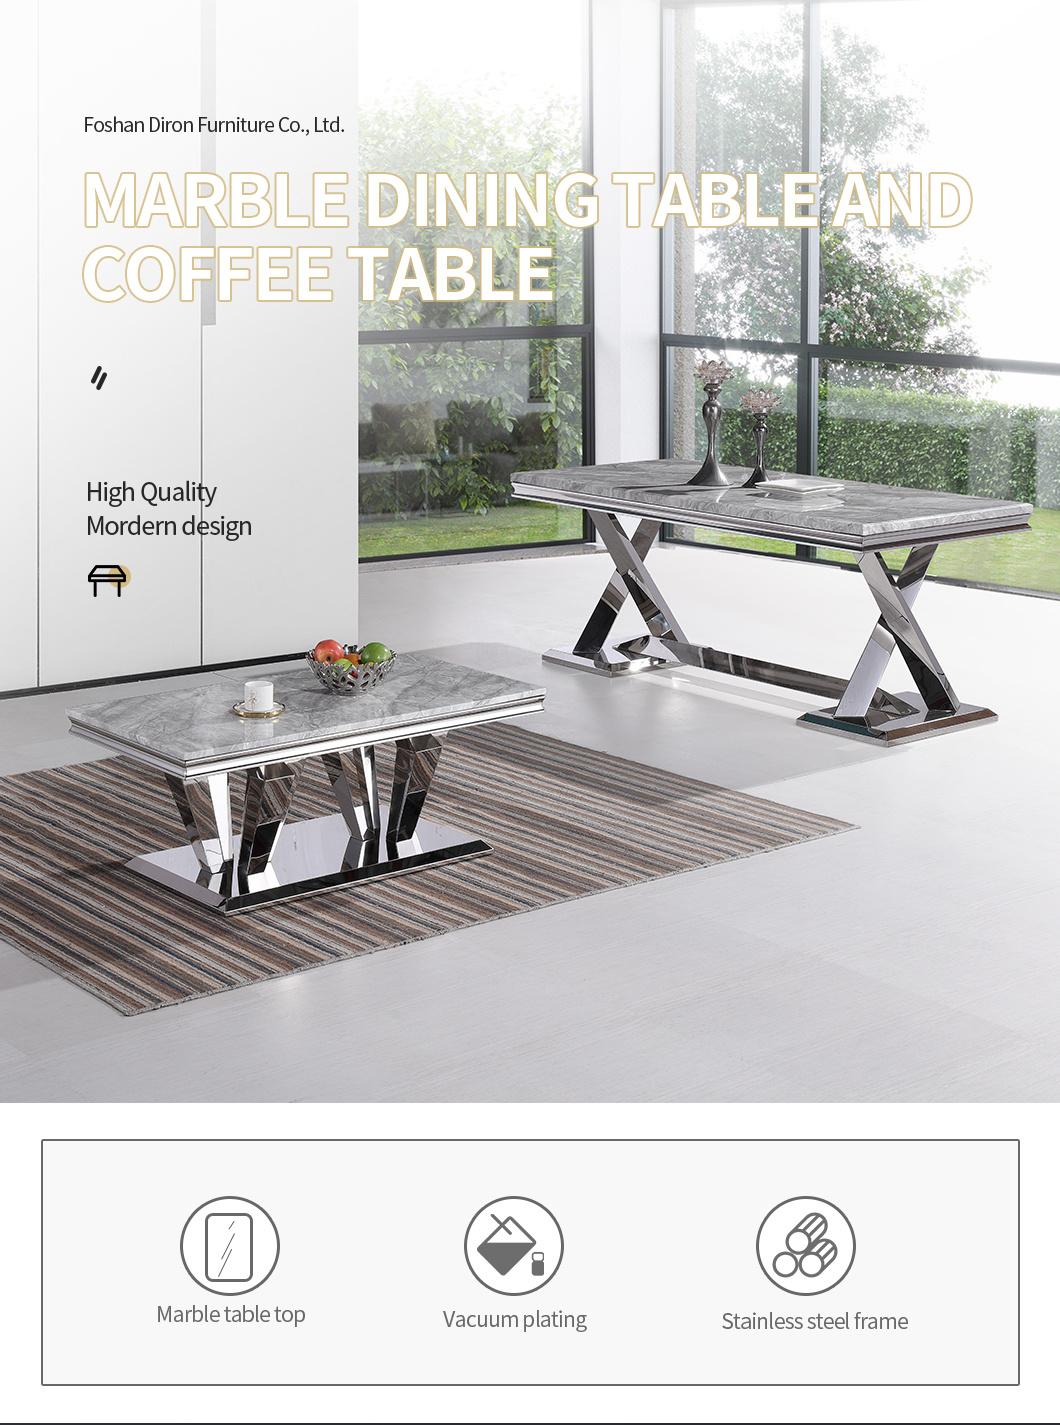 Luxury Design Coffee Tables Rectangle Shaped Modern Stainless Steel Center Table for Living Room Villa House Furniture